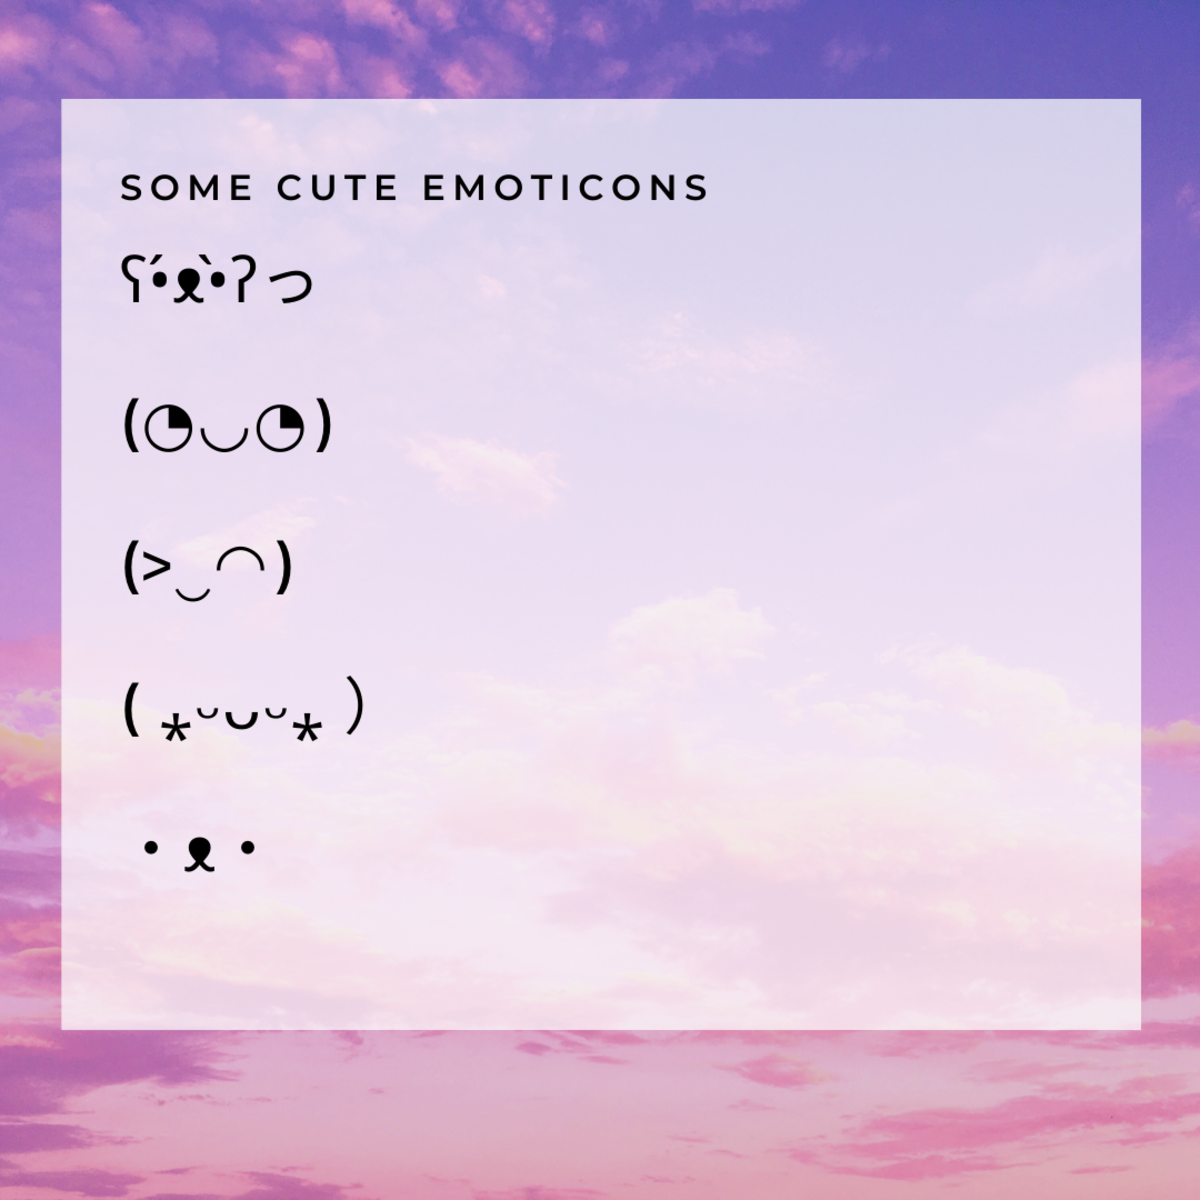 Here are some super cute emoticons and kaomoji to take a look at!